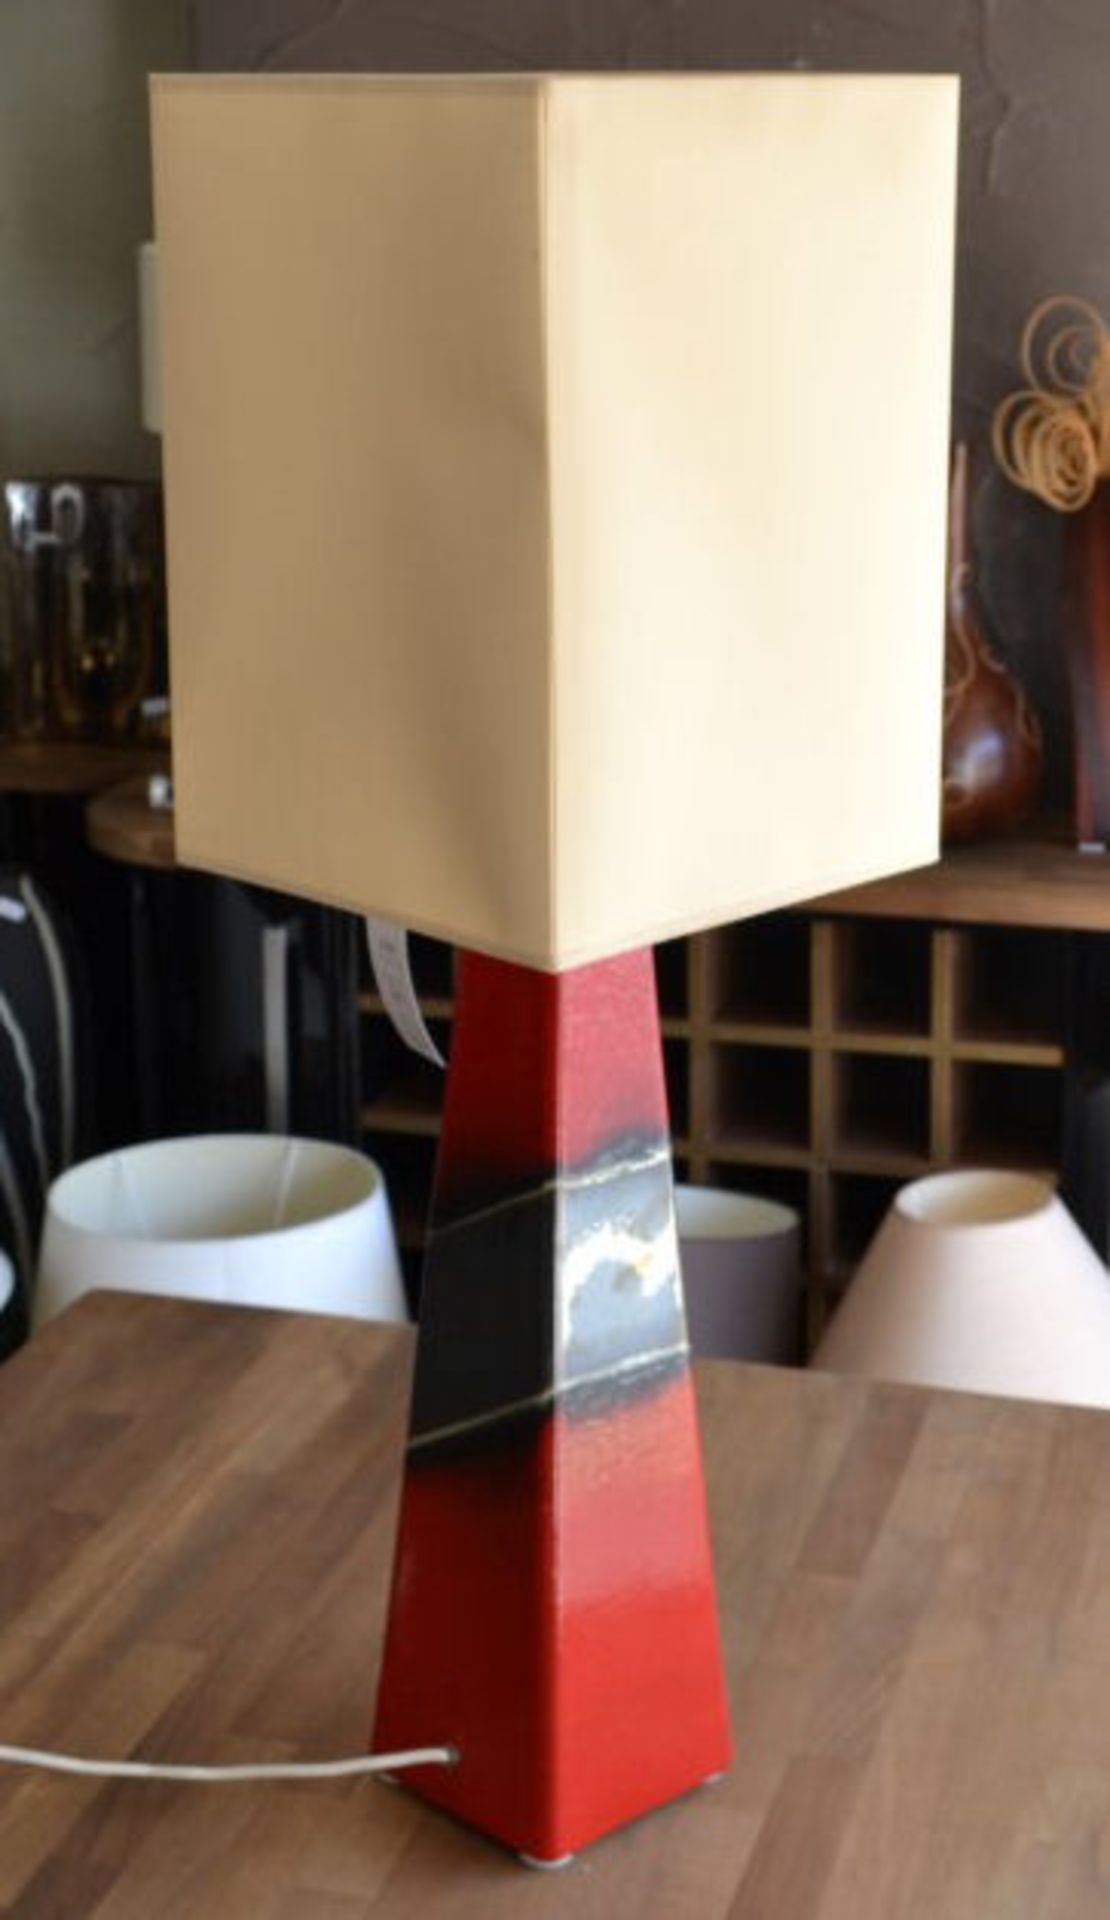 1 x Tall Contemporary Red And Dark Silver Lamp - Image 4 of 4